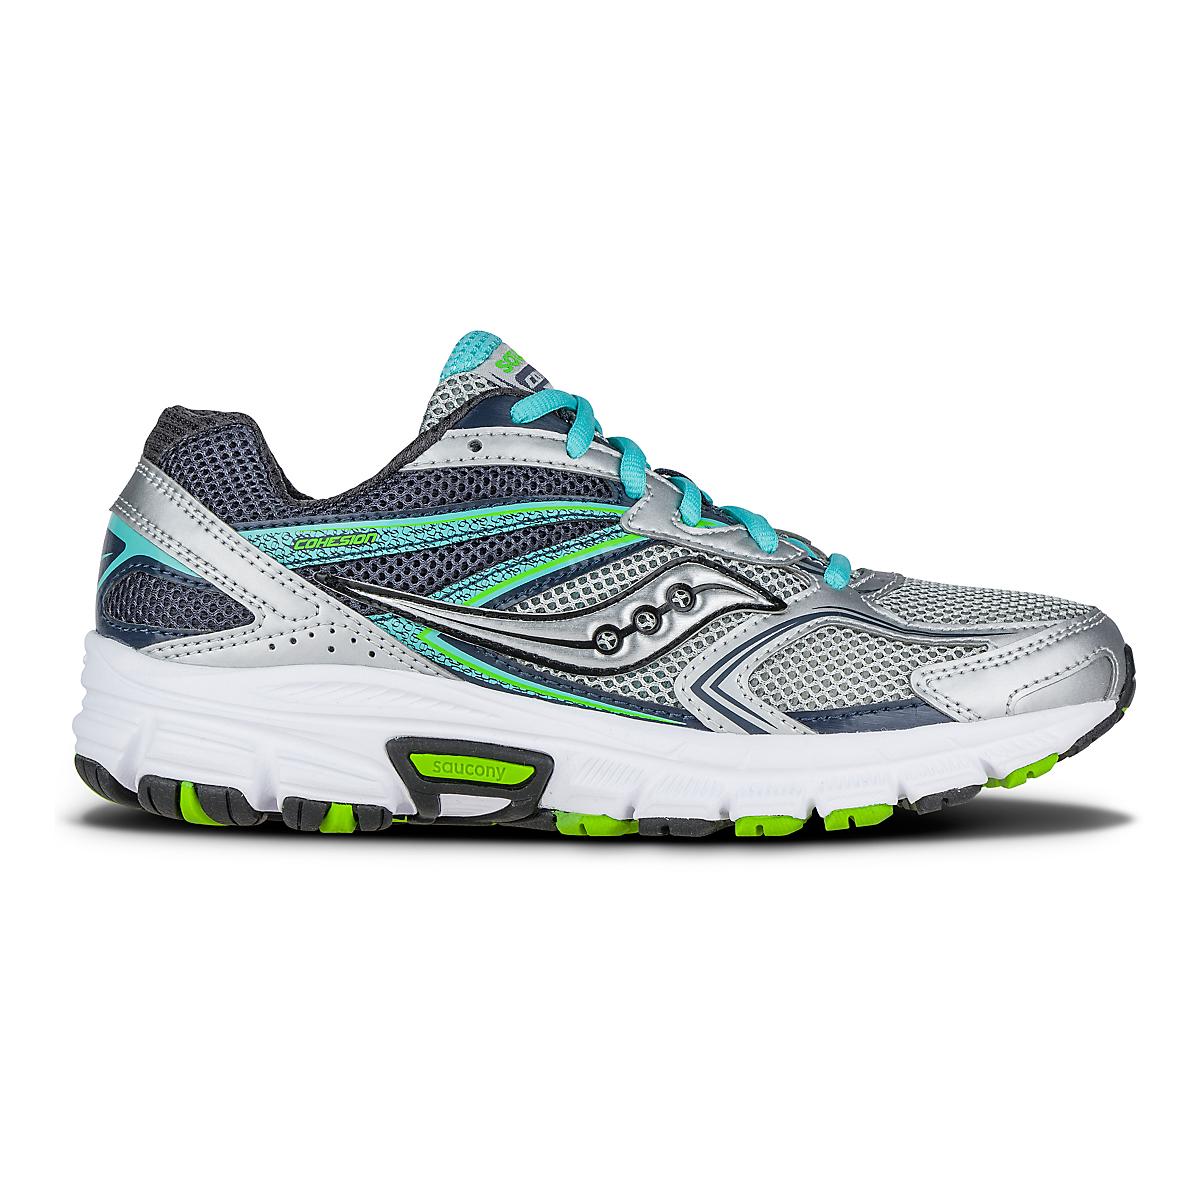 Womens Saucony Cohesion 9 Running Shoe at Road Runner Sports